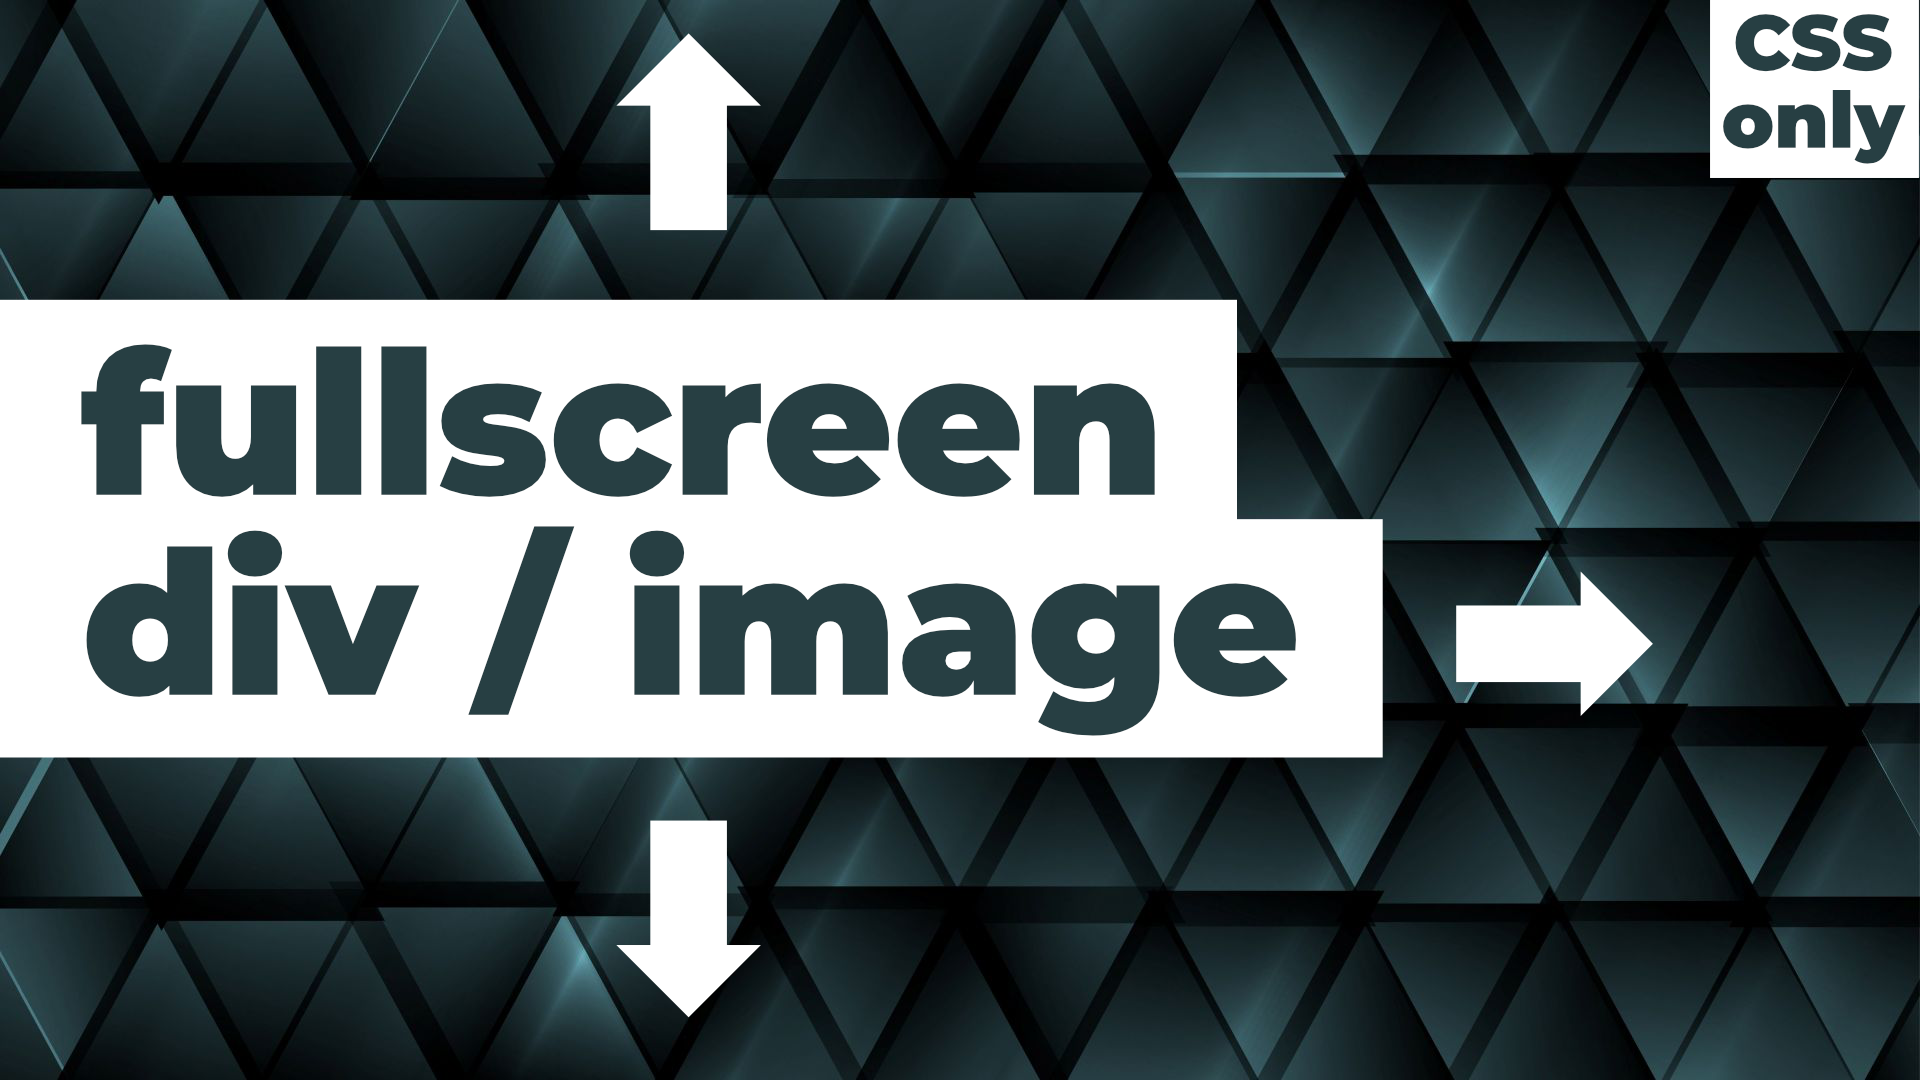 Learn how to make image full-screen in HTML CSS. Three approaches how to make CSS div image full screen or even a CSS overlay.